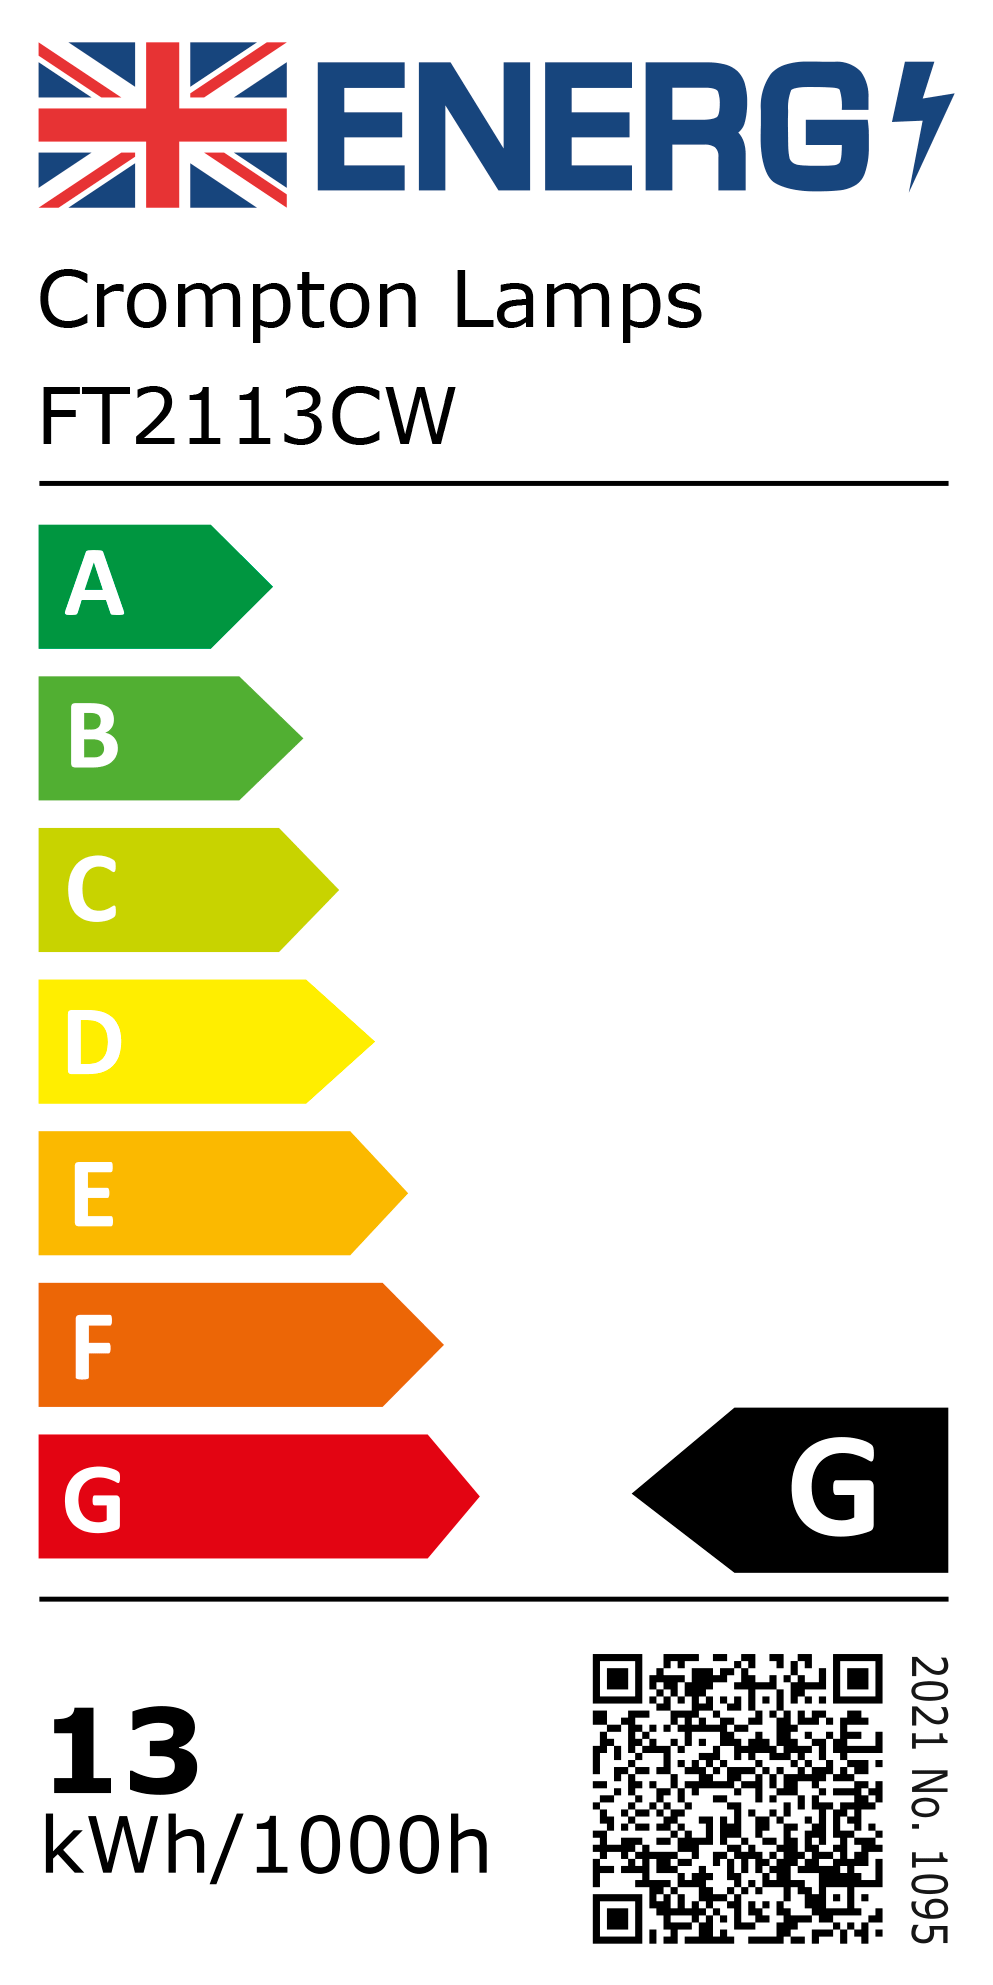 New 2021 Energy Rating Label: Stock Code FT2113CW